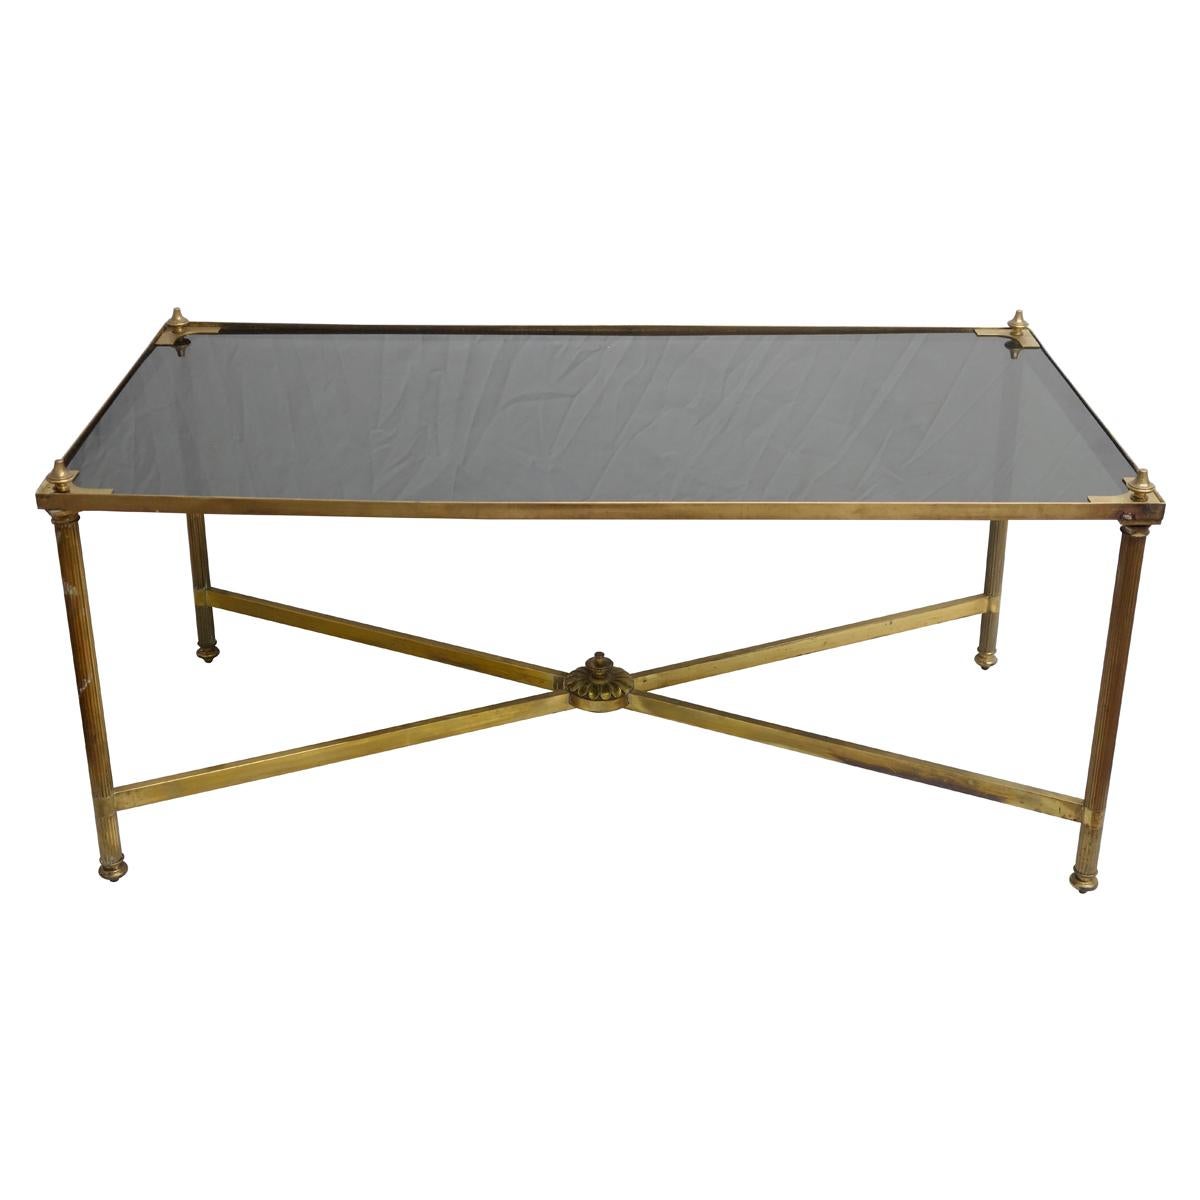 Maison Jansen midcentury coffee table, manufactured in brass and black glass top.